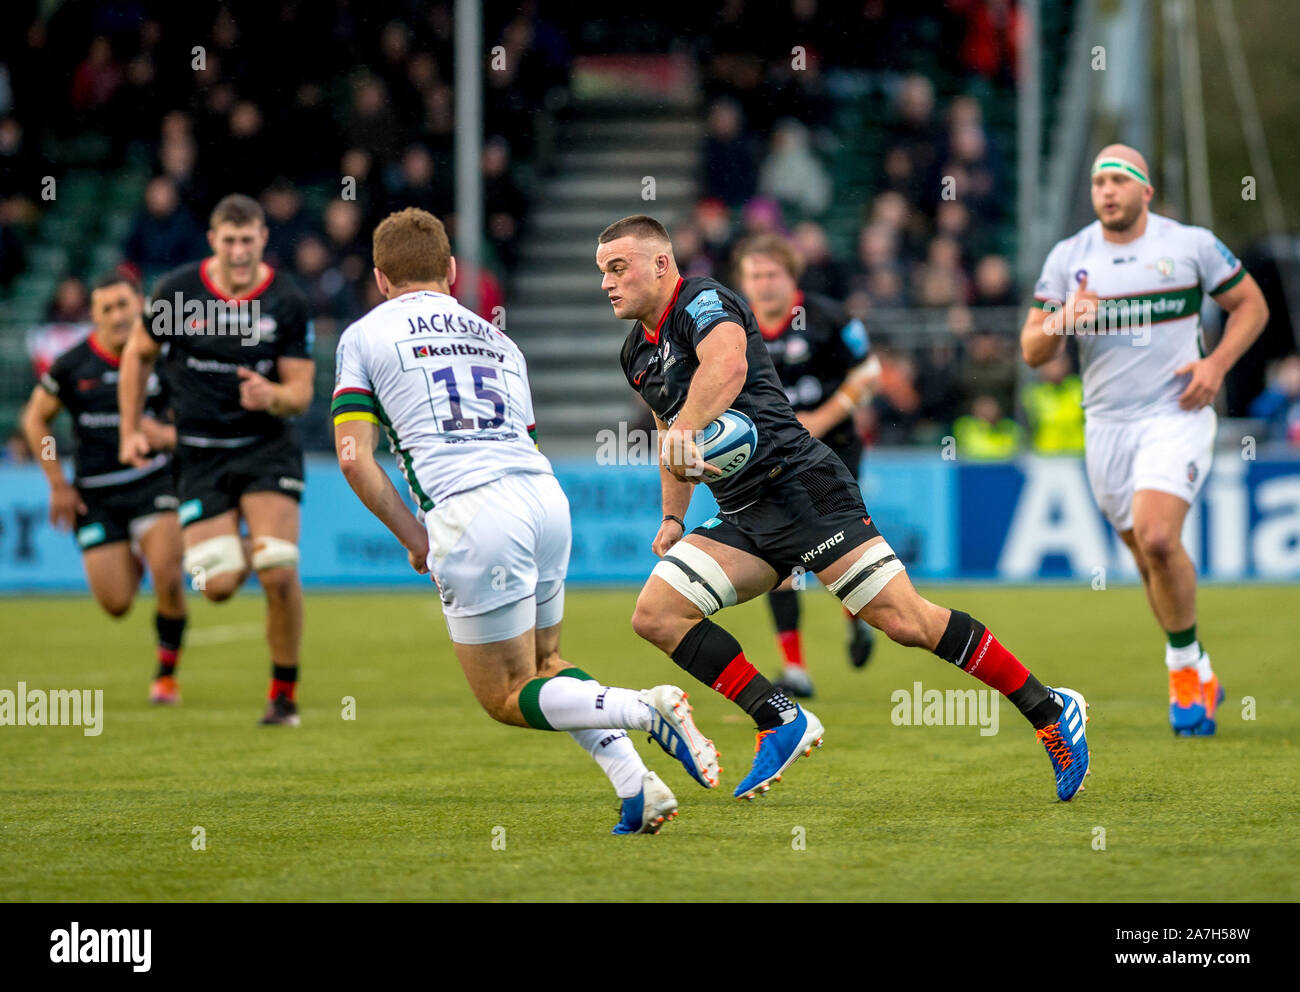 London, UK. 02nd Nov, 2019. Ben Earl of Saracens with the ball during the Gallagher Premiership Rugby match between Saracens and London Irish at the Allianz Park, London, England. Photo by Phil Hutchinson. Credit: UK Sports Pics Ltd/Alamy Live News Stock Photo